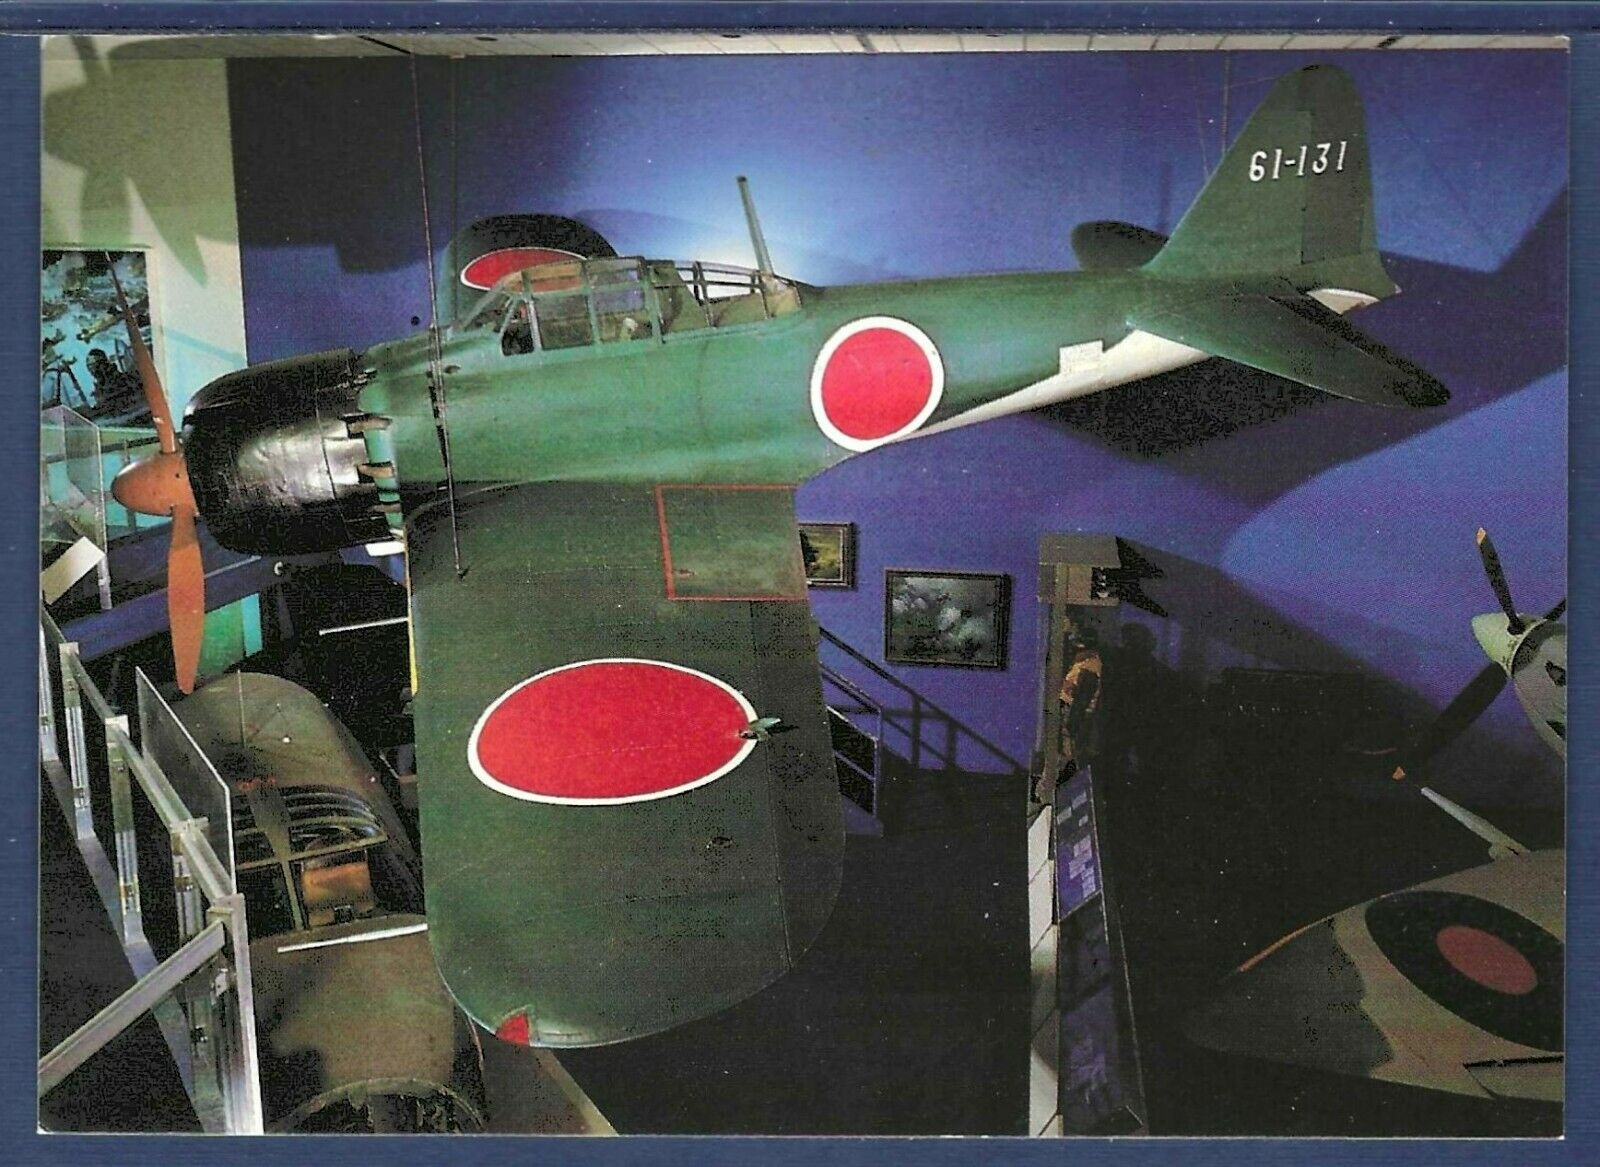 Mitsubishi A6M5 Zero Imperial Japanese Navy Carrier-Based Fighter Aircraft